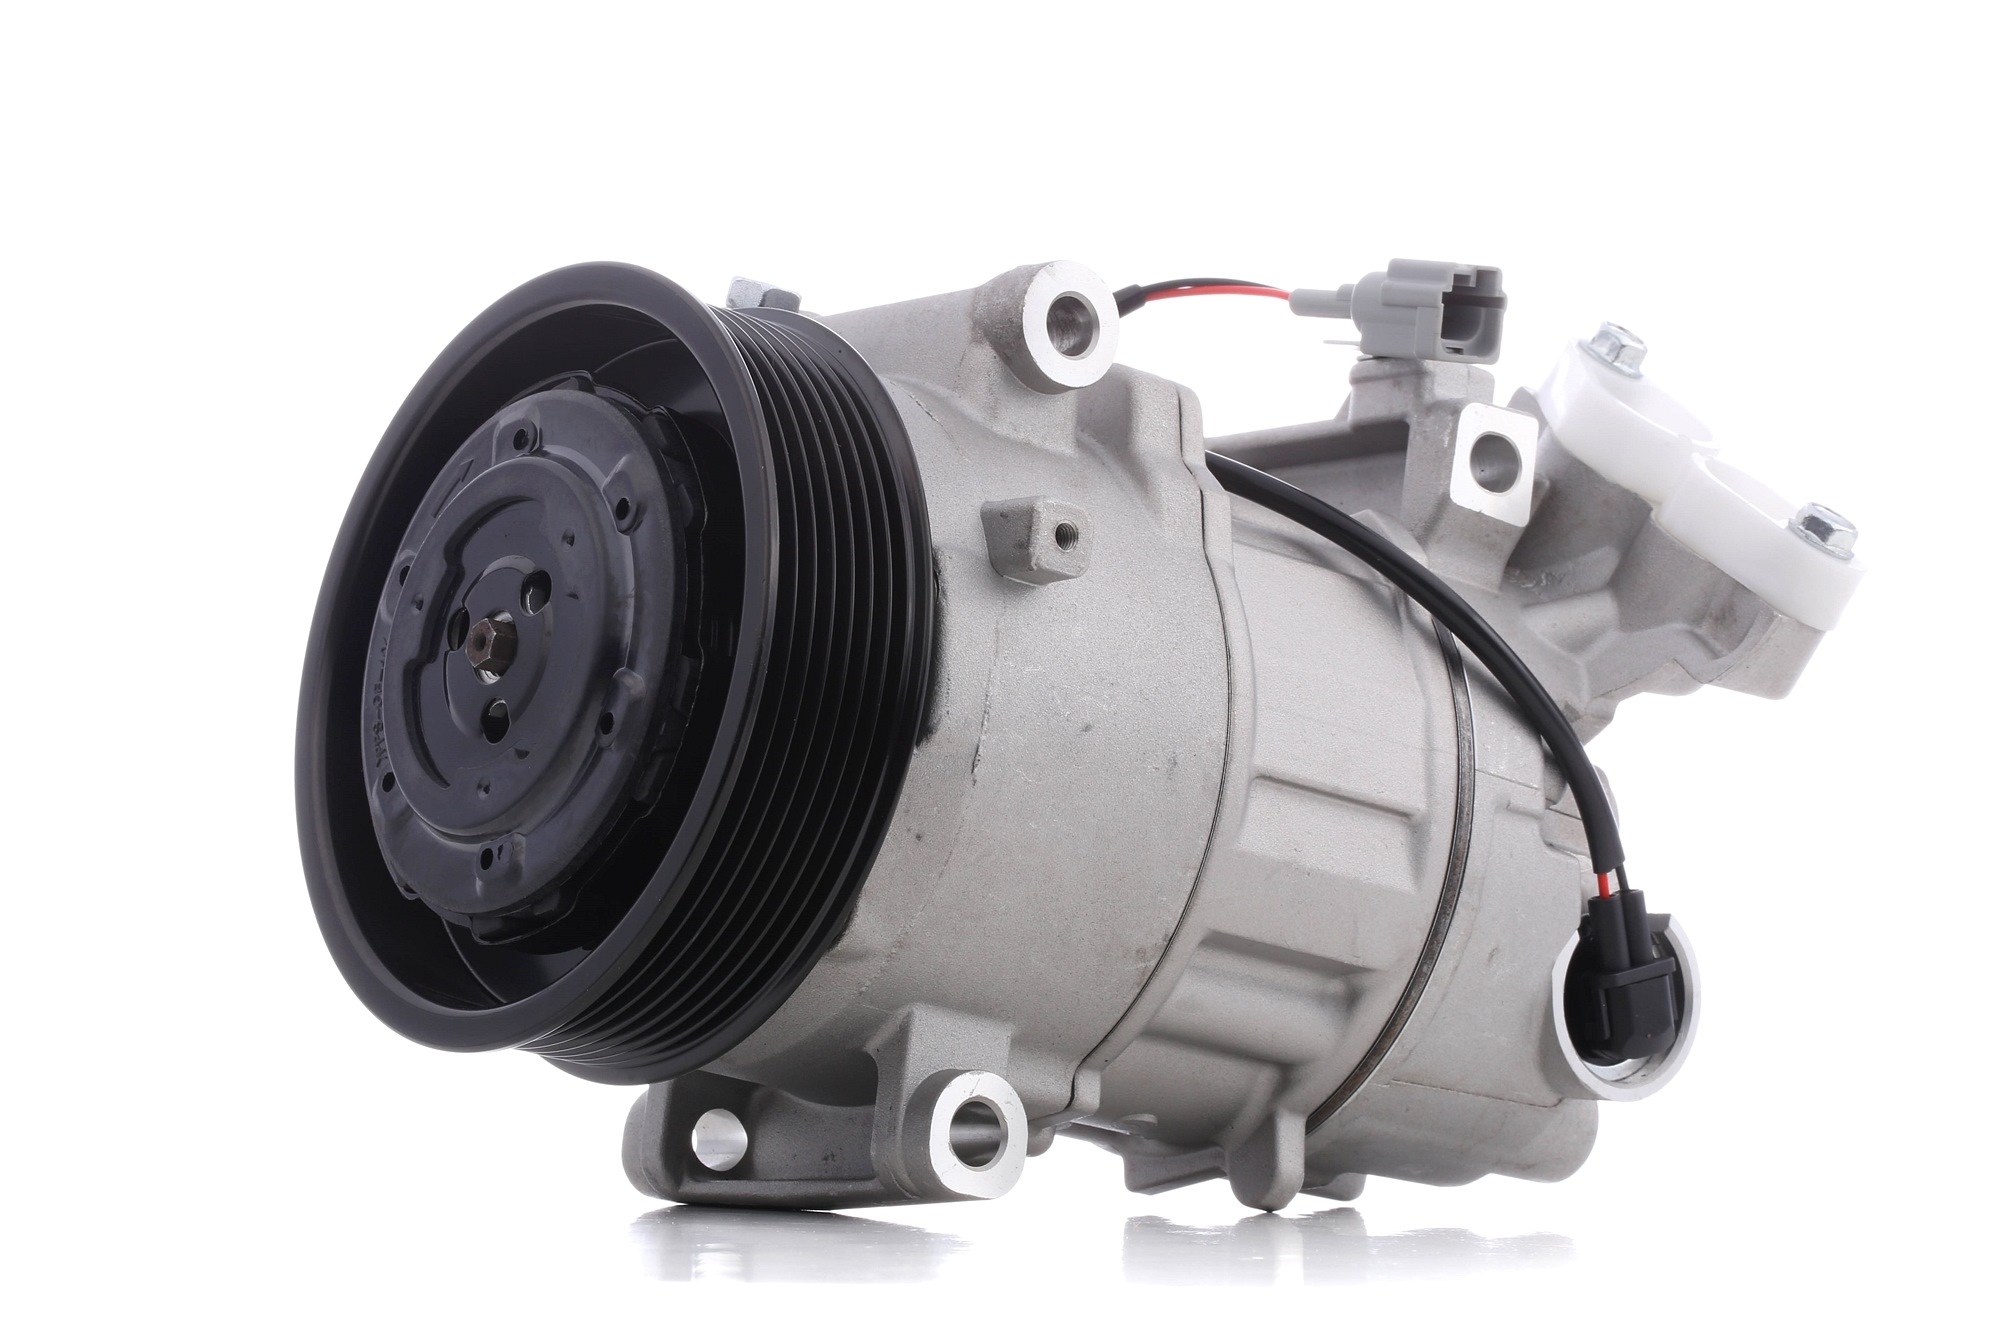 STARK SKKM-0340284 Air conditioning compressor 6SE14, PAG 46, R 134a, with PAG compressor oil